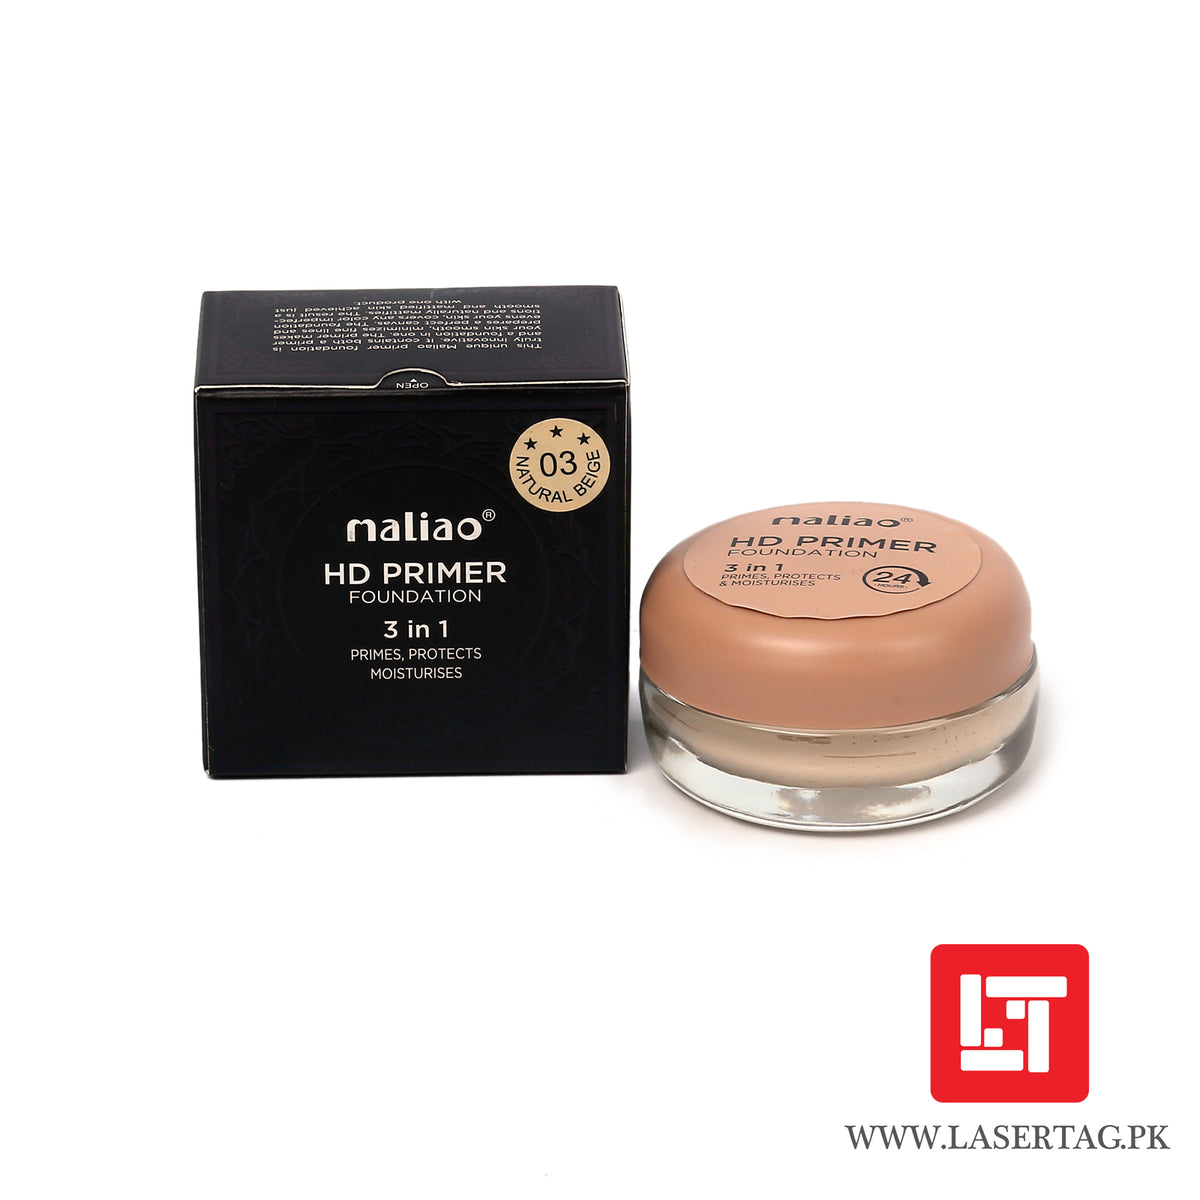 Maliao HD Primer Foundation 3 In 1 Primes, Protects, Moisturises Natural Beige M227-03 20g freeshipping - lasertag.pk